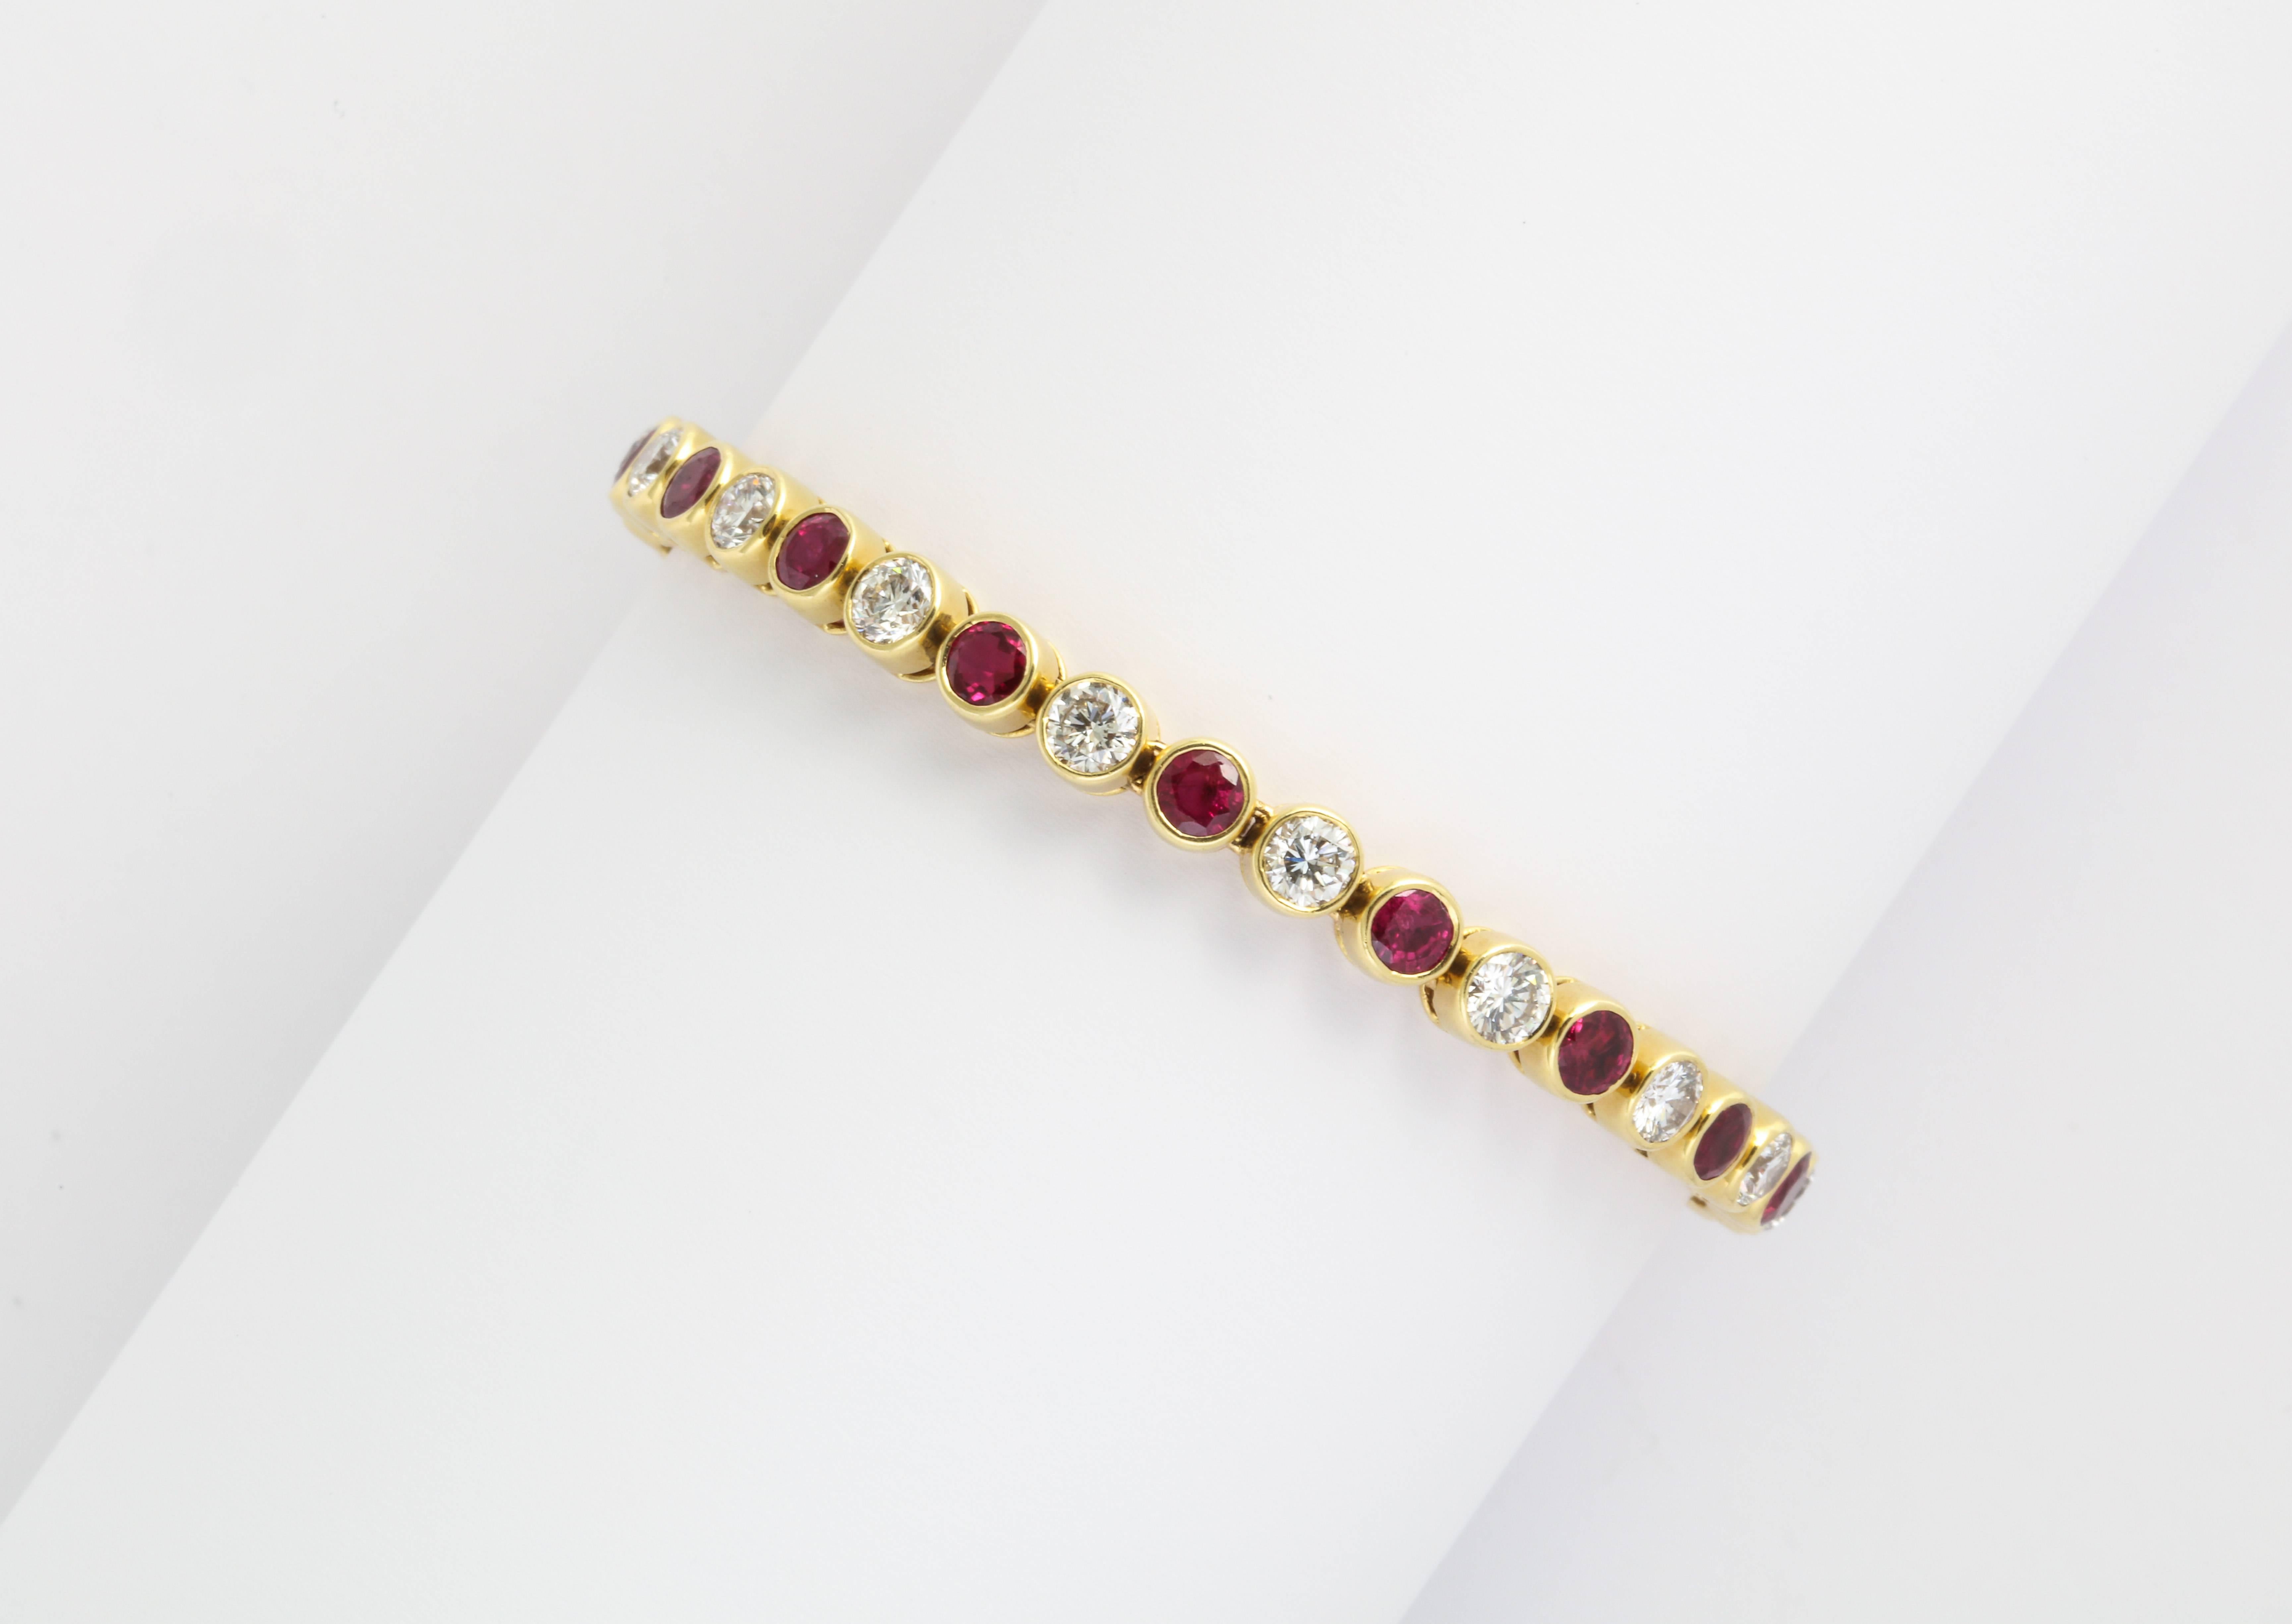 Harry Winston Diamond Ruby Tennis Bracelet

18 Rubies weigh 7.26 ct
18 round cut diamonds weigh 4.66 ct

Stamped WINSTON

With copy of Harry Winston receipt from June 9 1993